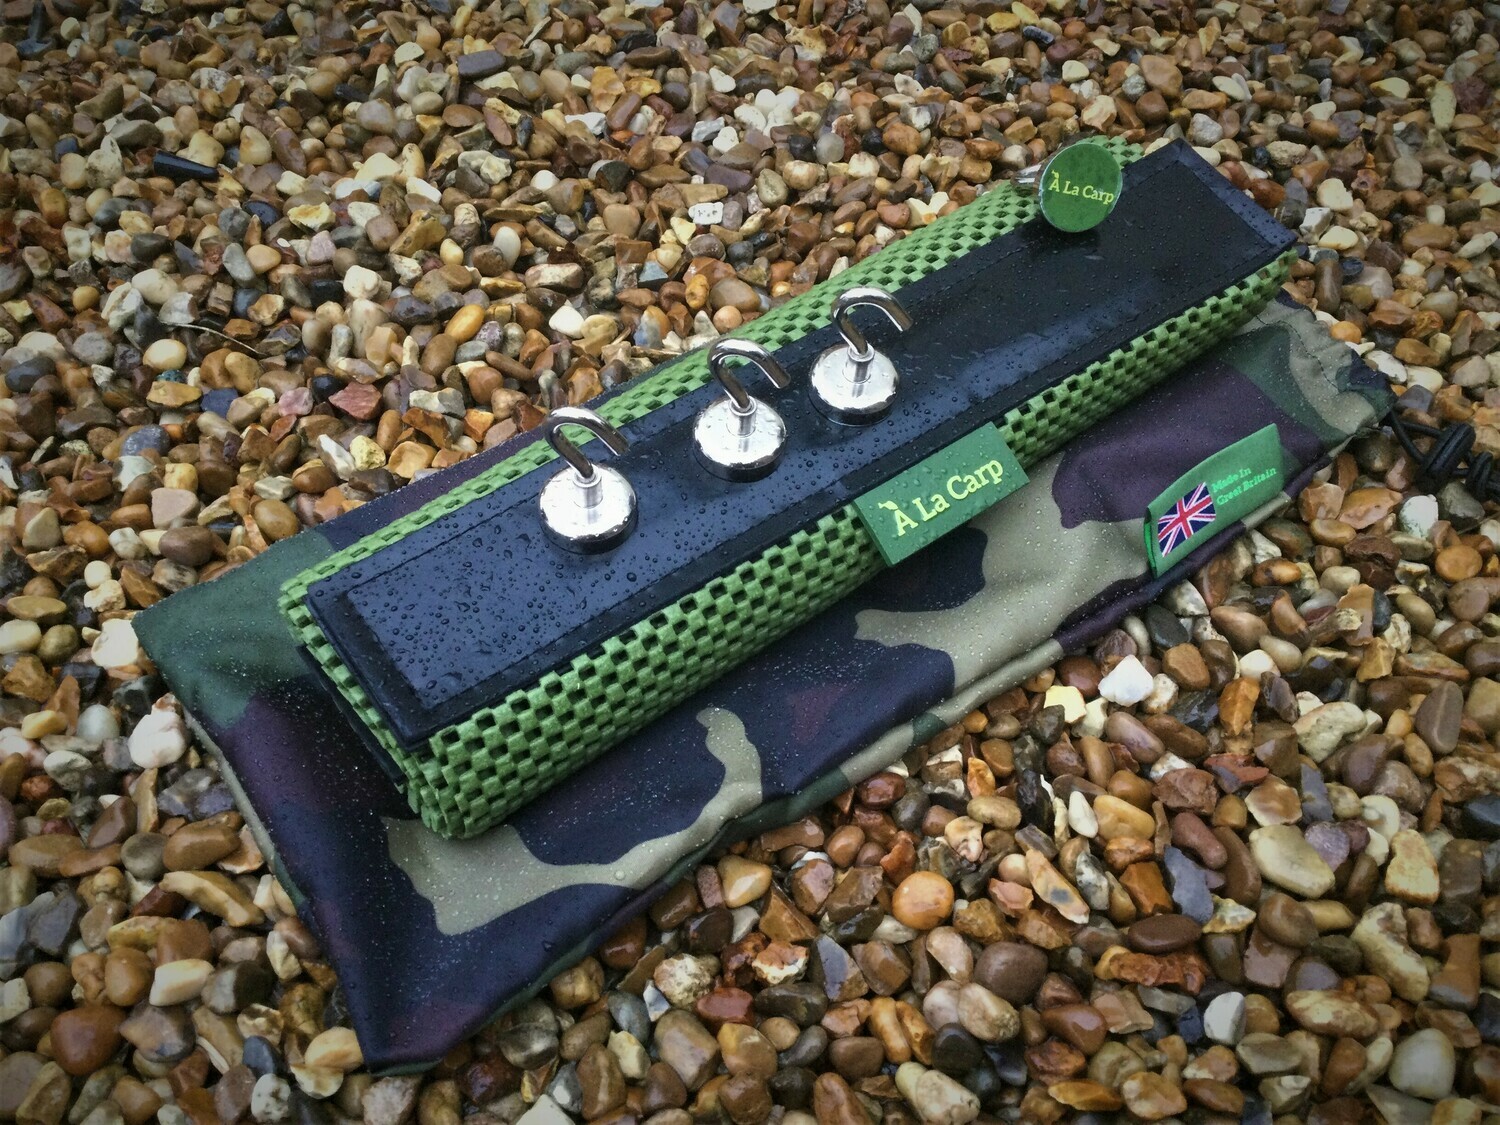 Bivvy Top Work Mat and 4 Magnetic Hooks